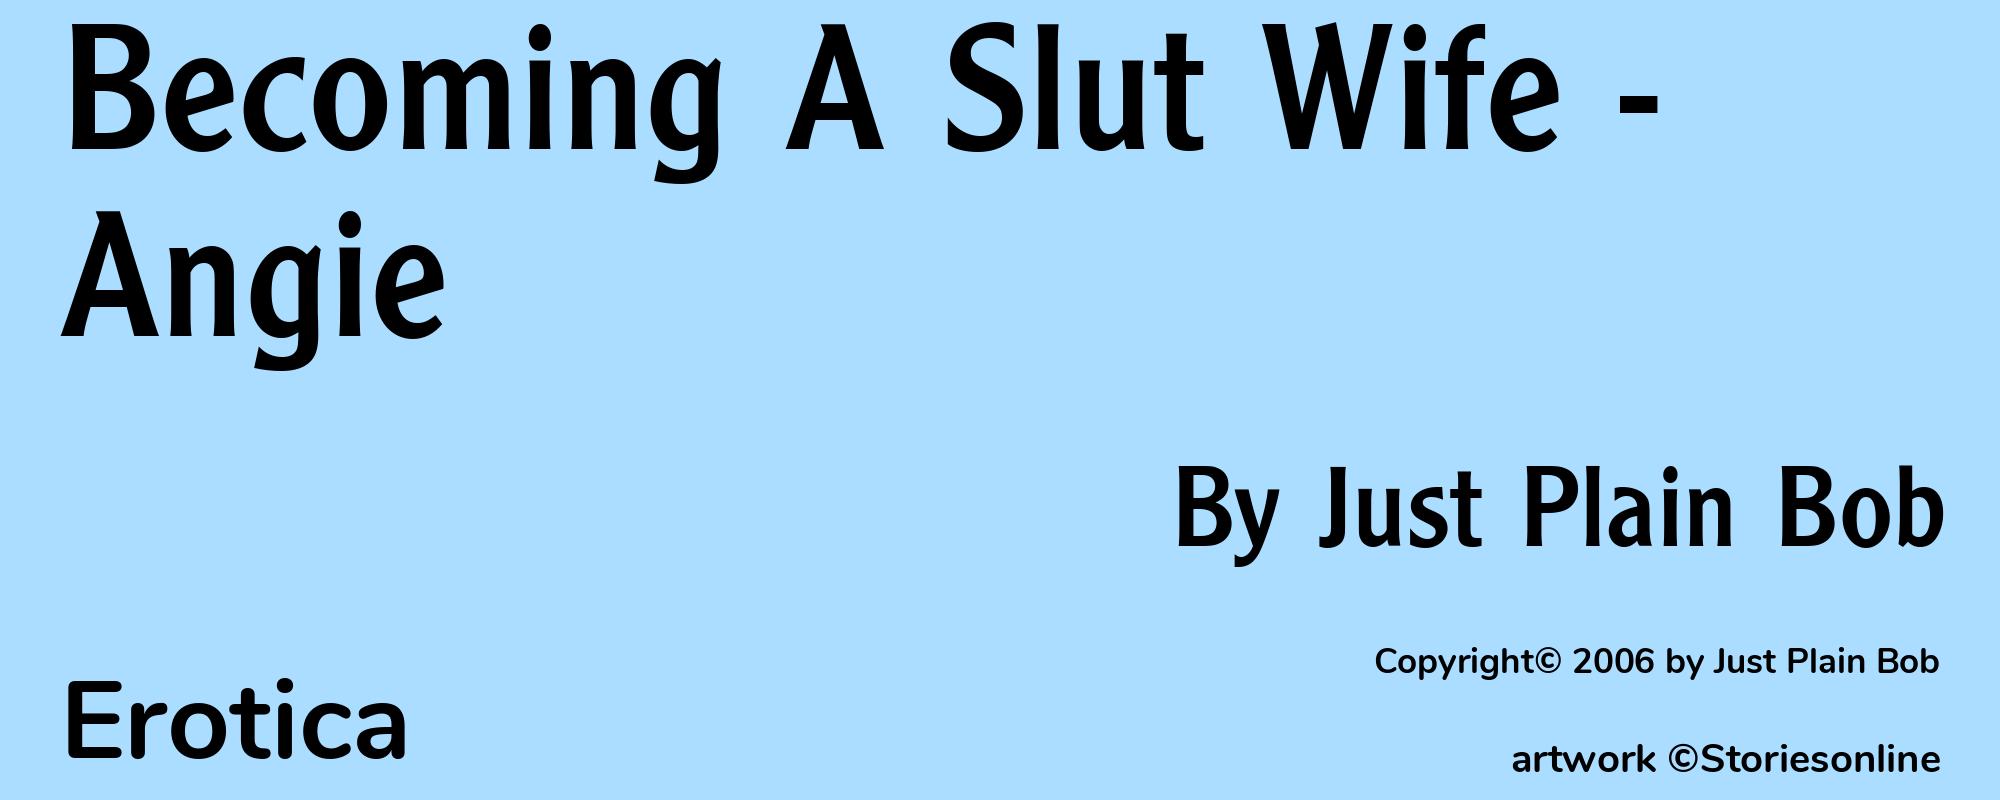 Becoming A Slut Wife - Angie - Cover